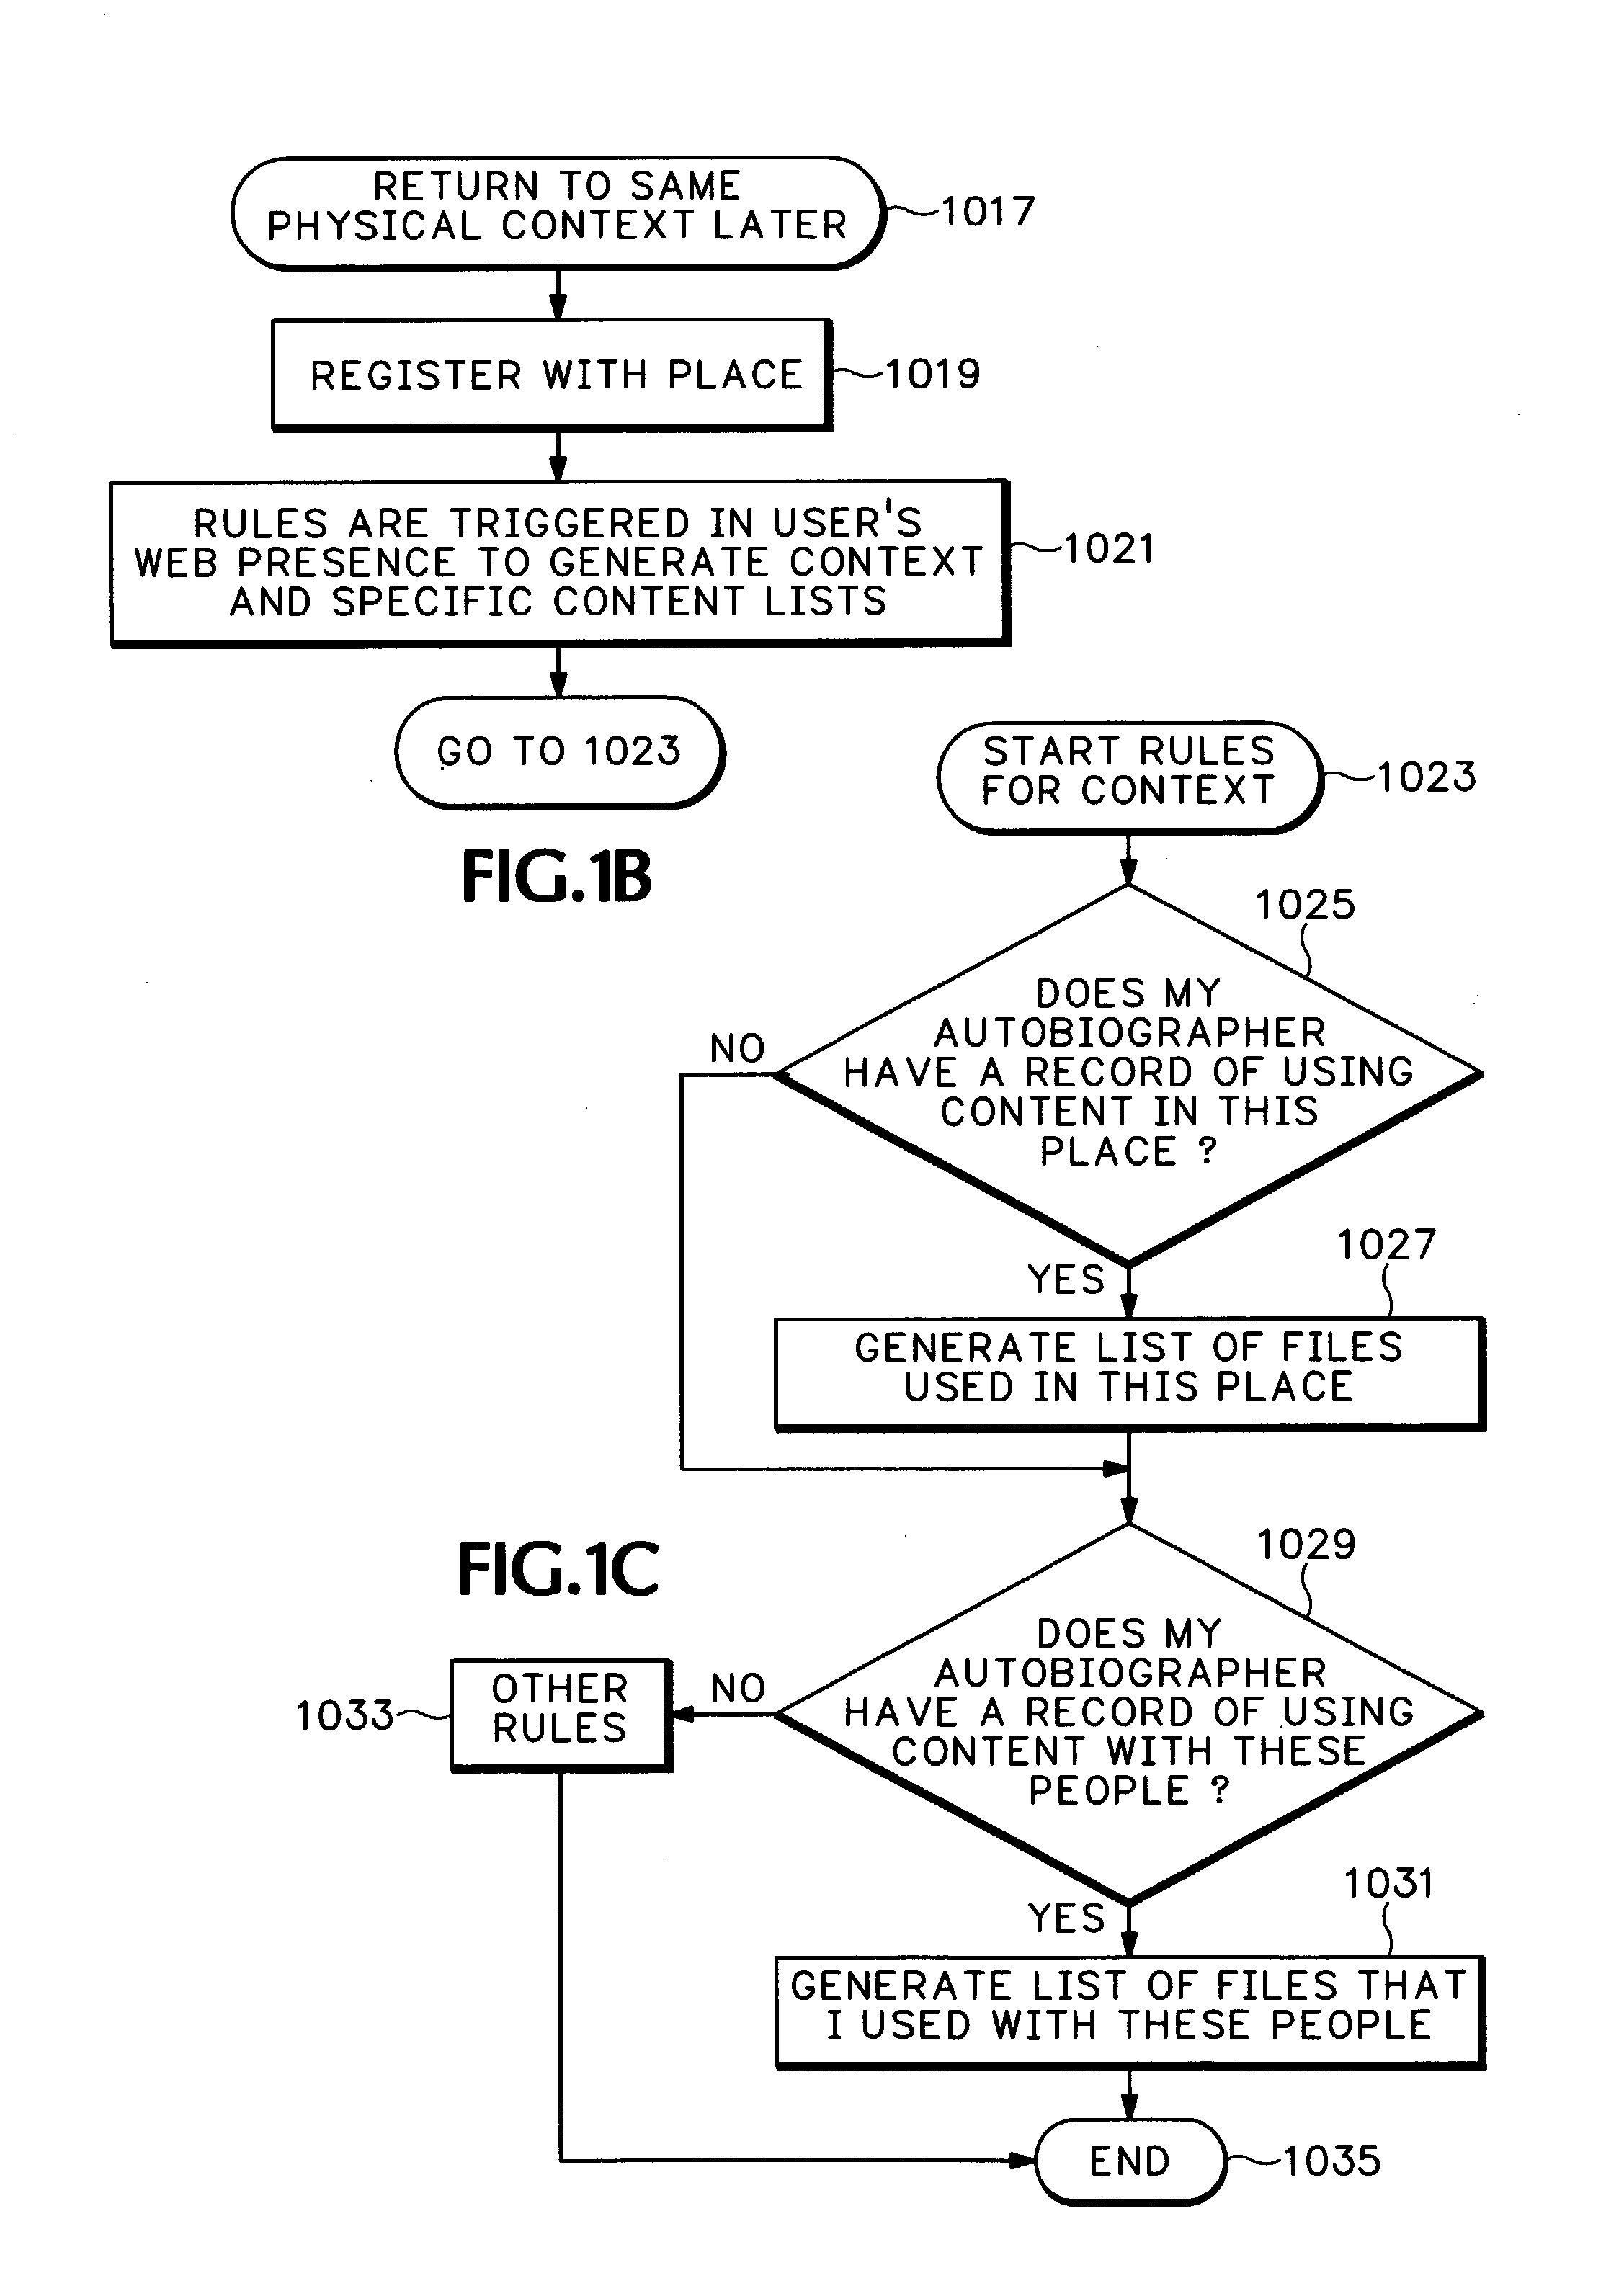 File processing using mapping between web presences